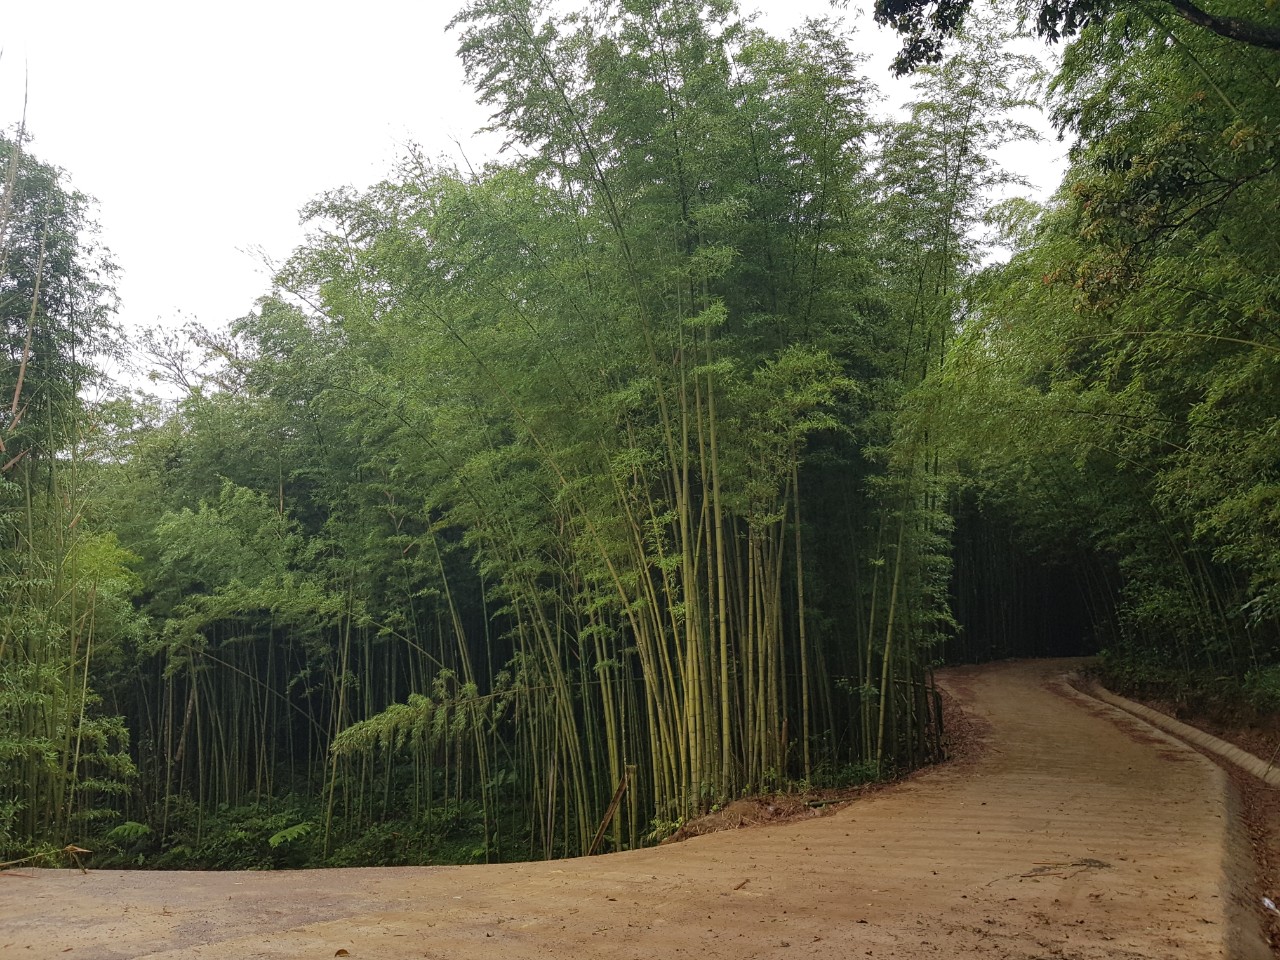 Bamboo grown in Cao Bang province belongs to the bamboo family, the trunk is tall, hard and durable, producing many household items as well as serving for construction.